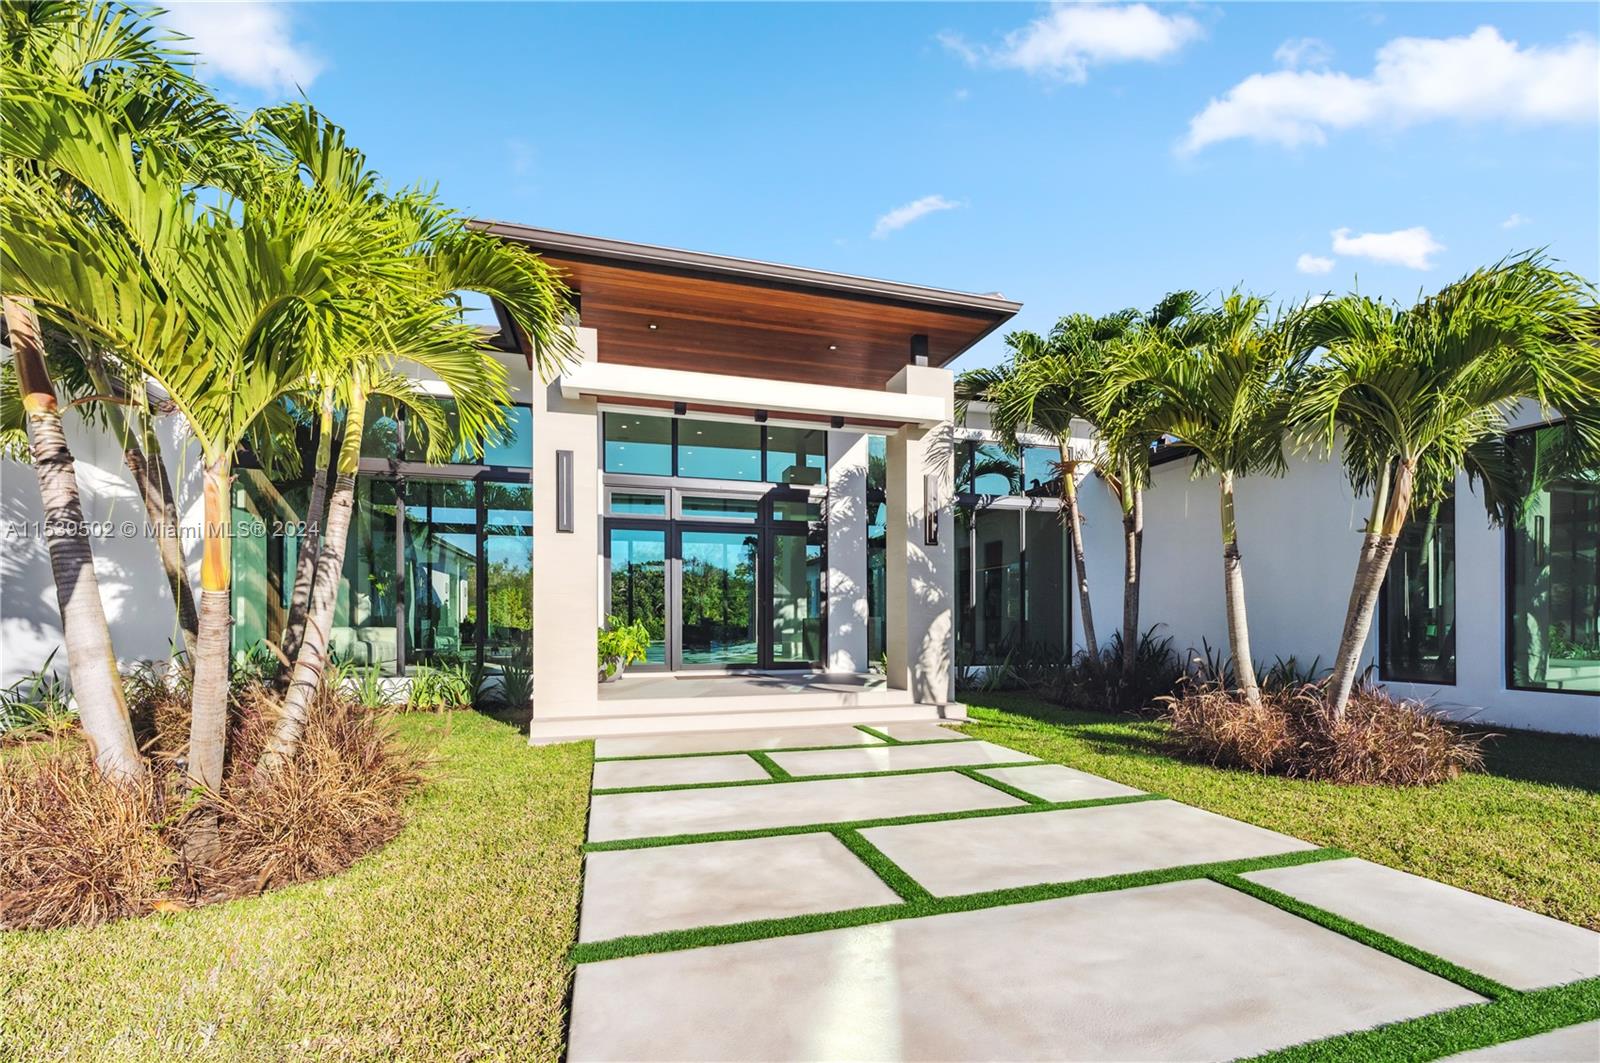 11501 Sw 67th Ave, Pinecrest, Miami-Dade County, Florida - 7 Bedrooms  
8 Bathrooms - 